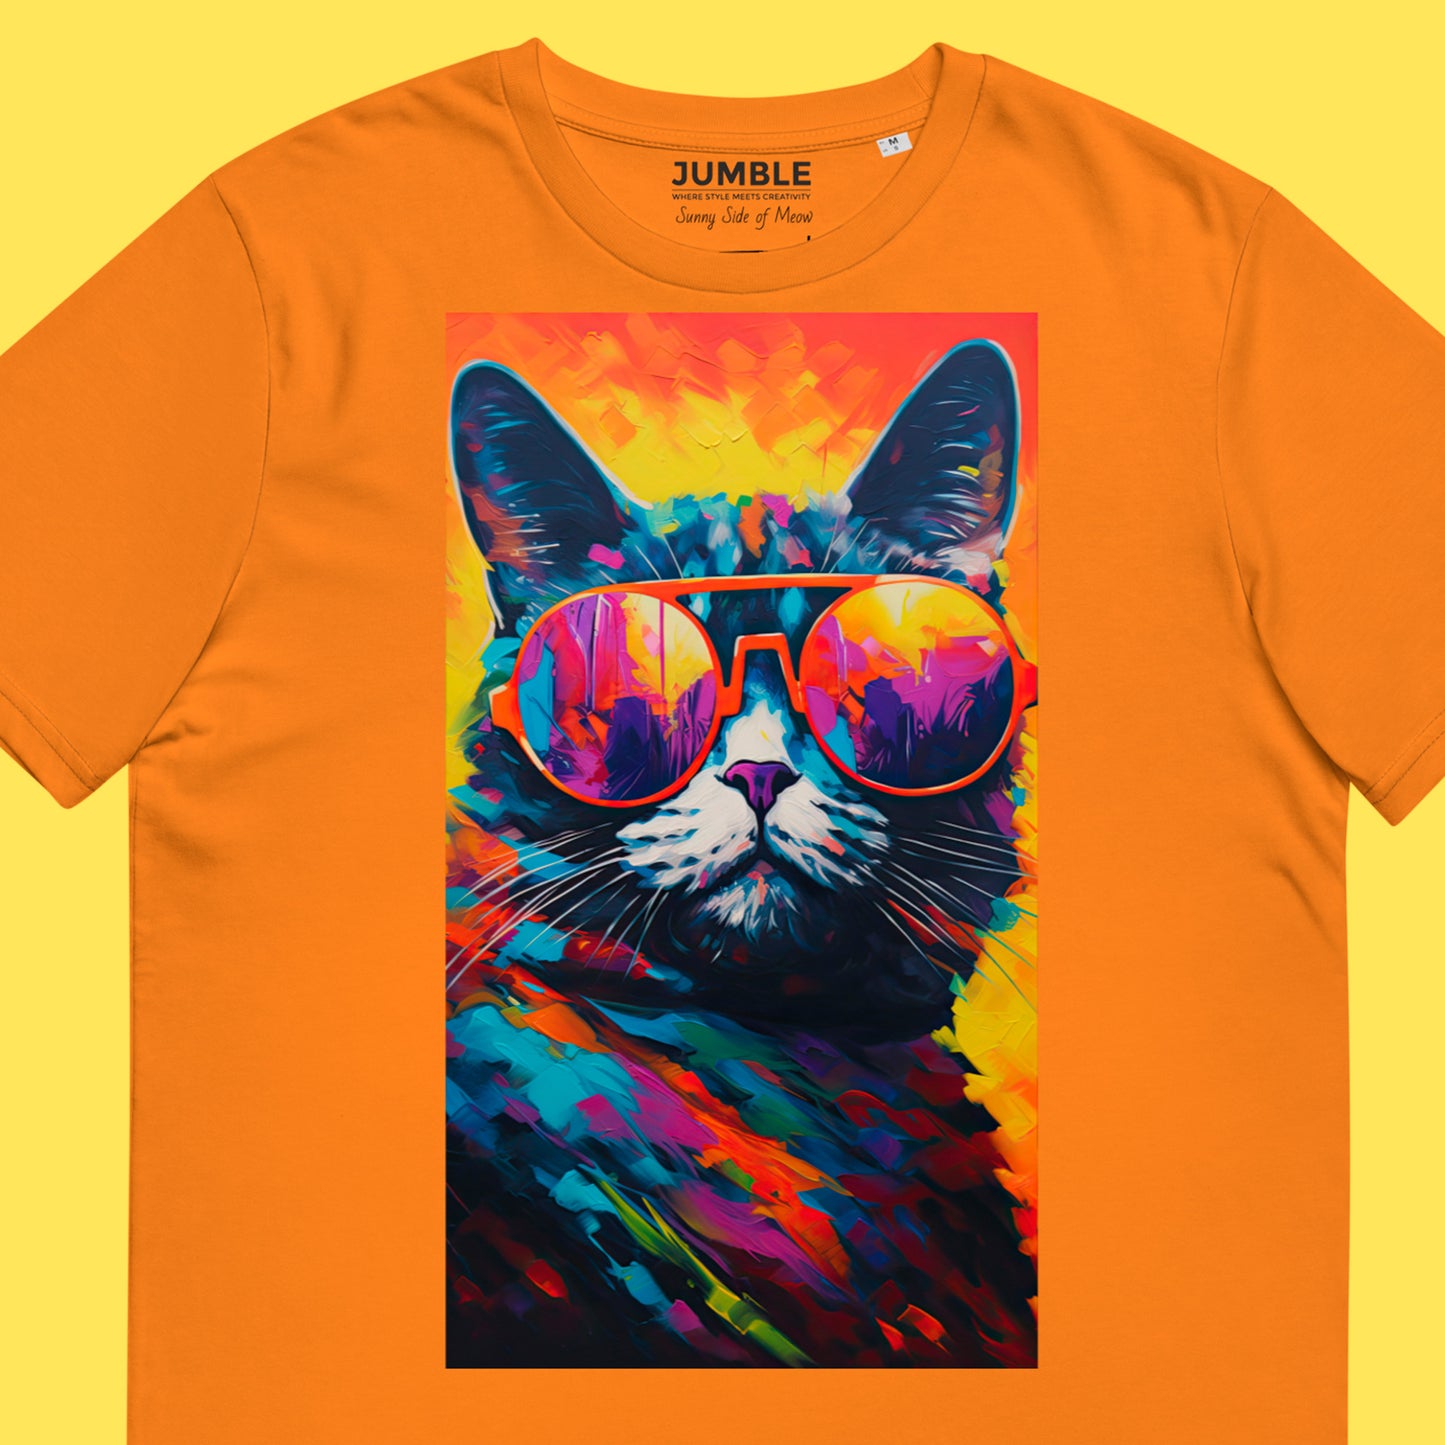 close up of artwork on Sunny Side of Meow Unisex organic cotton t-shirt